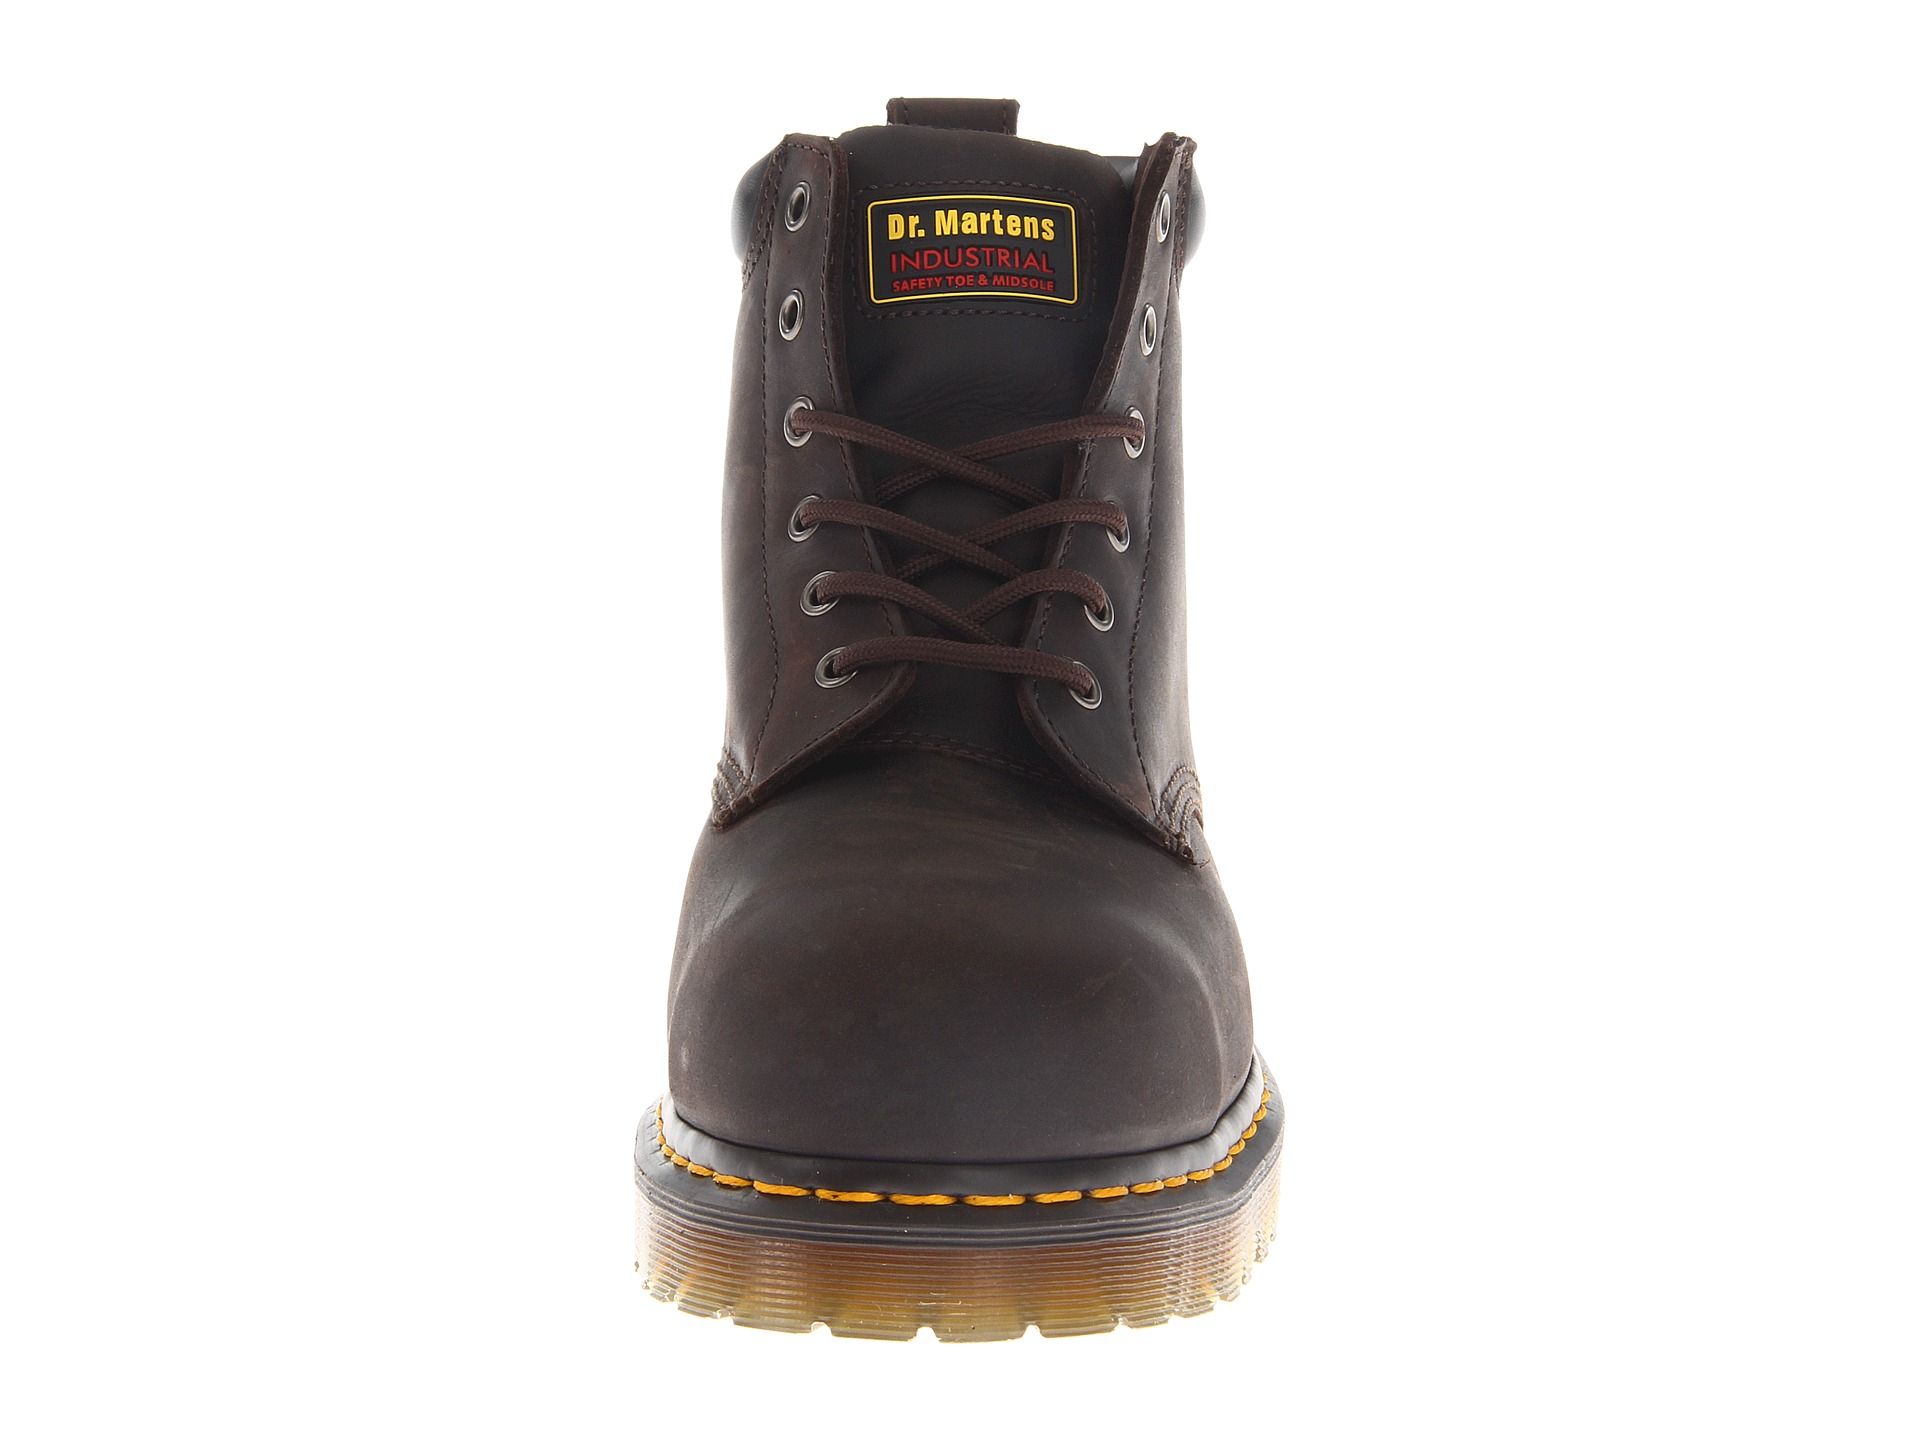 Dr. Martens Forge St 6 Eye Boot in Brown for Men - Lyst